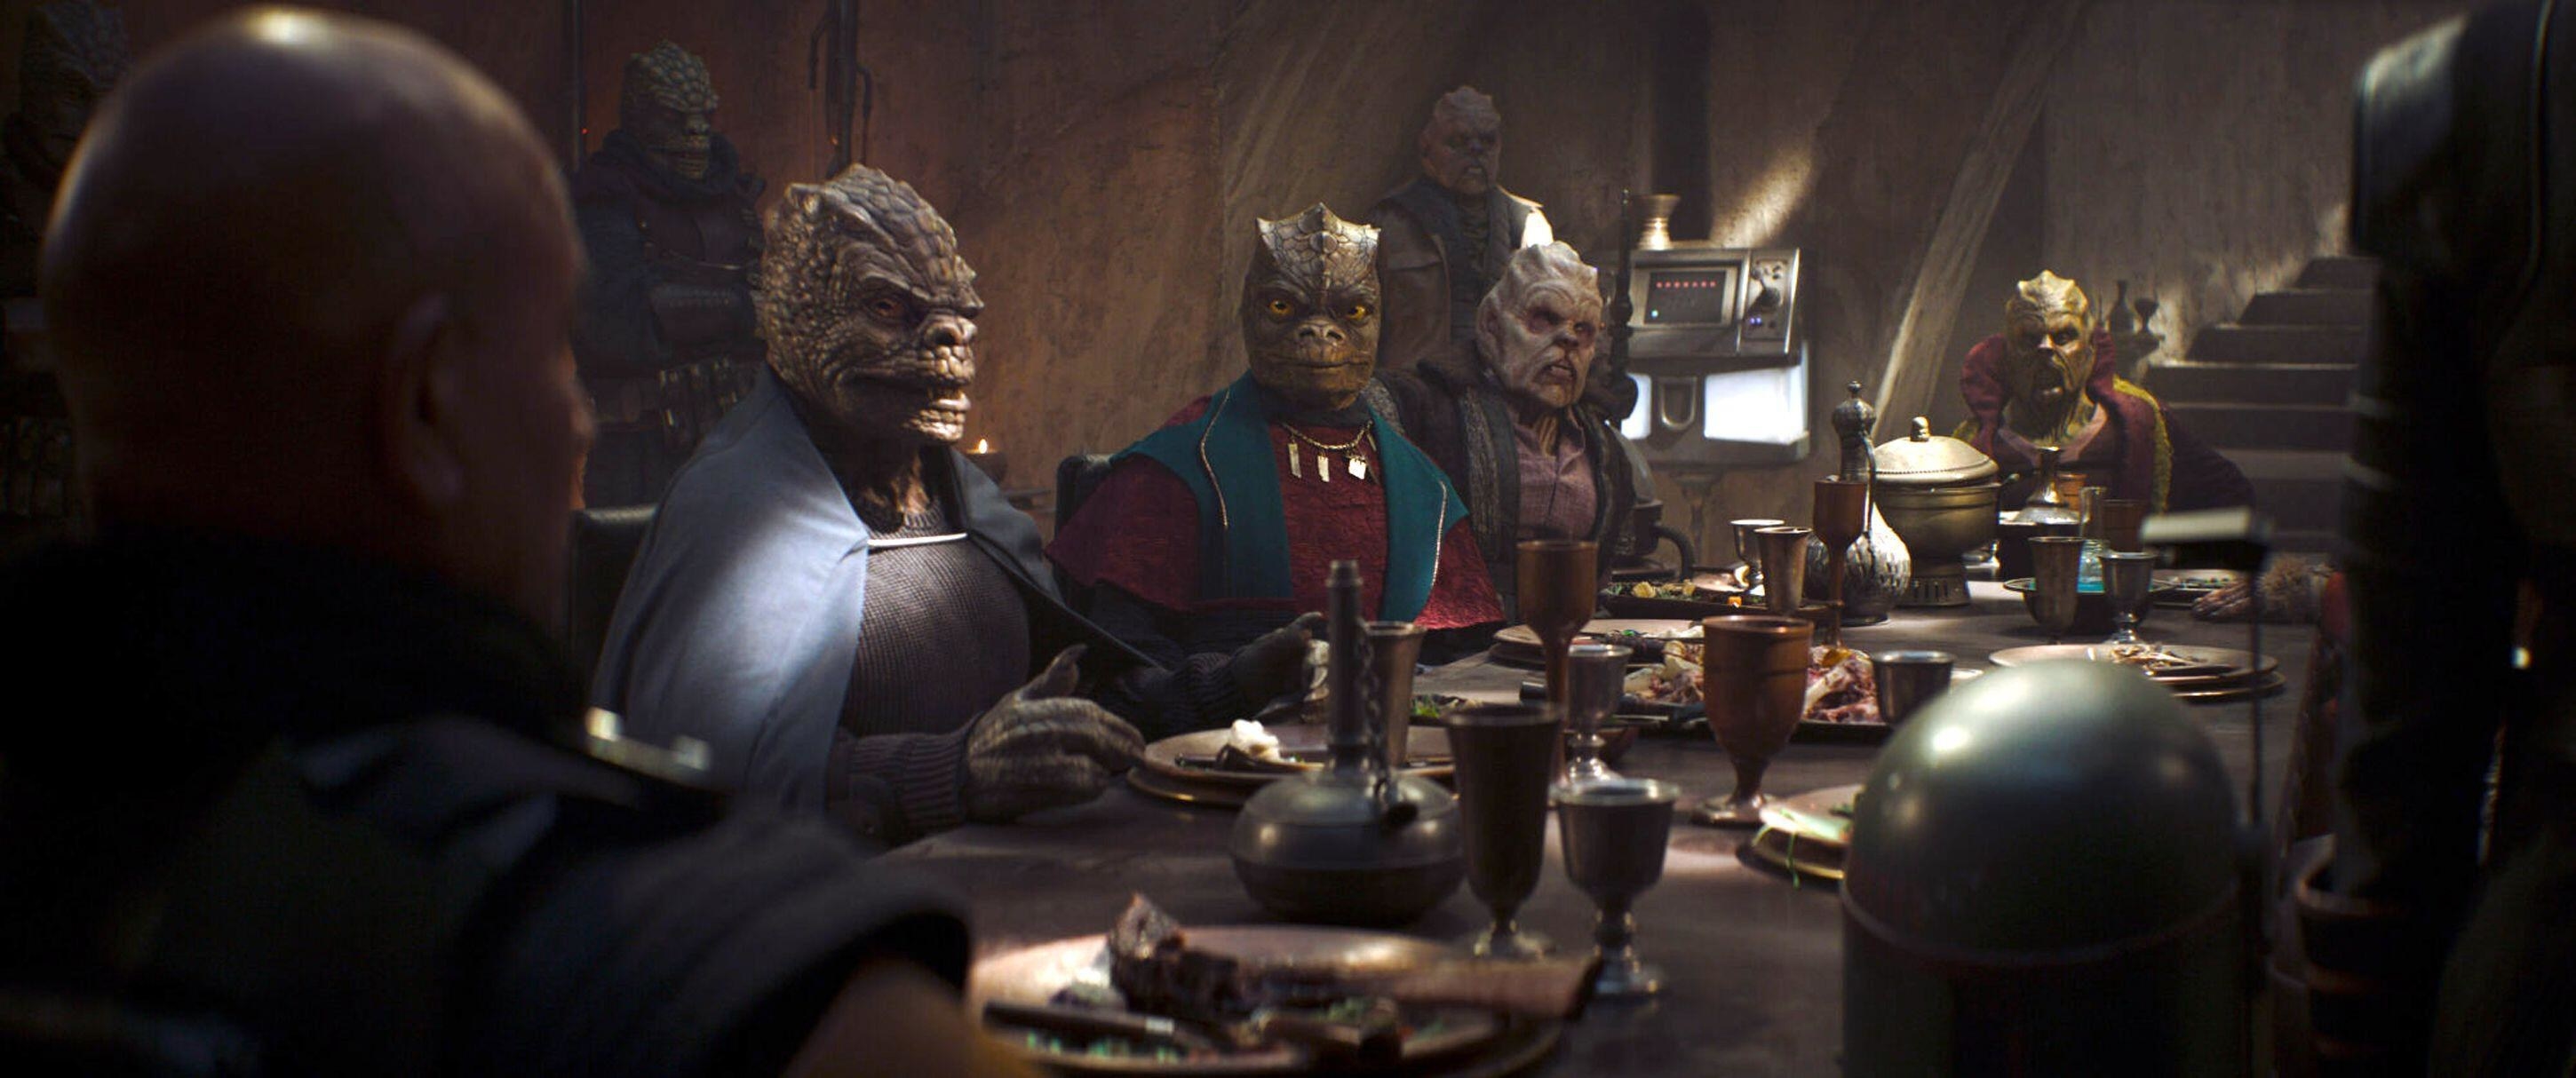 Aliens at a dinner table with Boba Fett